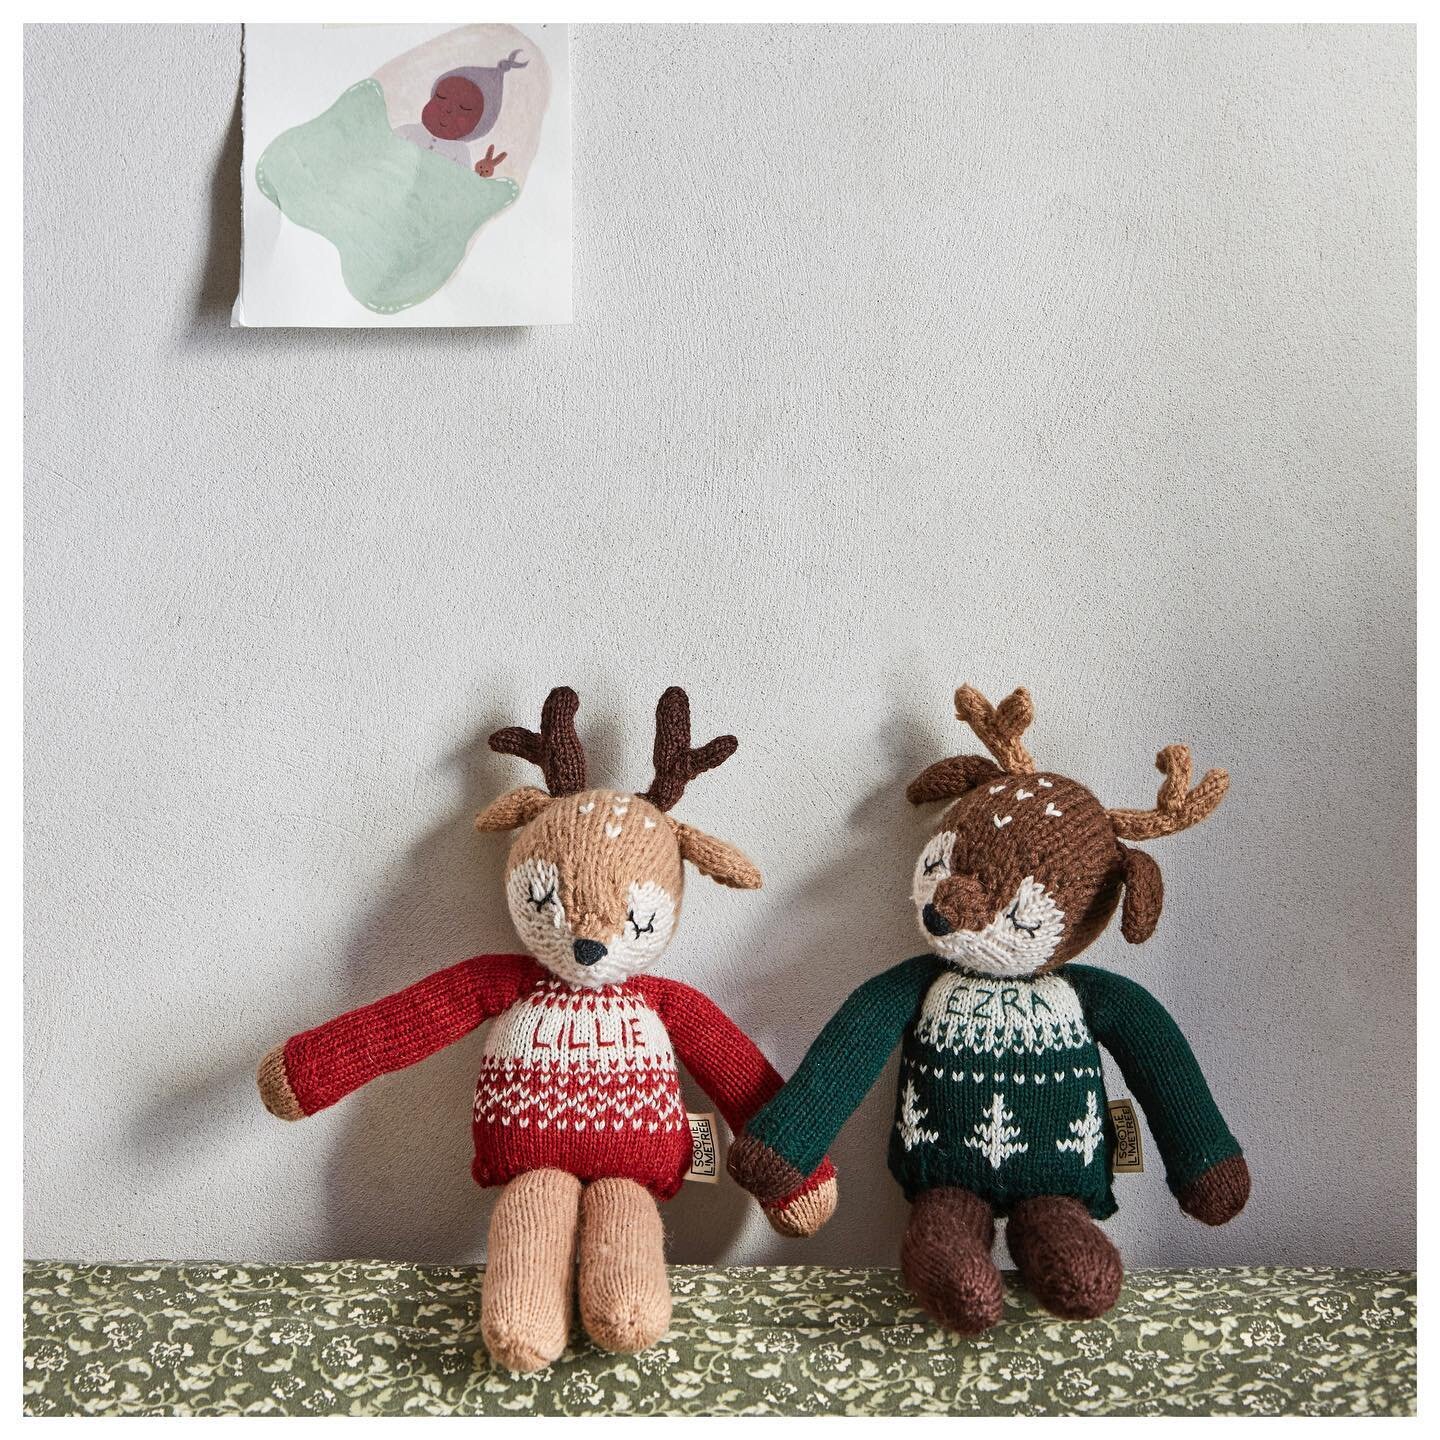 The Christmas shop is&hellip;open! And I kind of buried the lead if I&rsquo;m honest &lsquo;cos I neglected to mention that I made reindeers. In personalised Christmas jumpers. What can I say?You&rsquo;re. Welcome. 
&bull; 
All online now. Link in pr